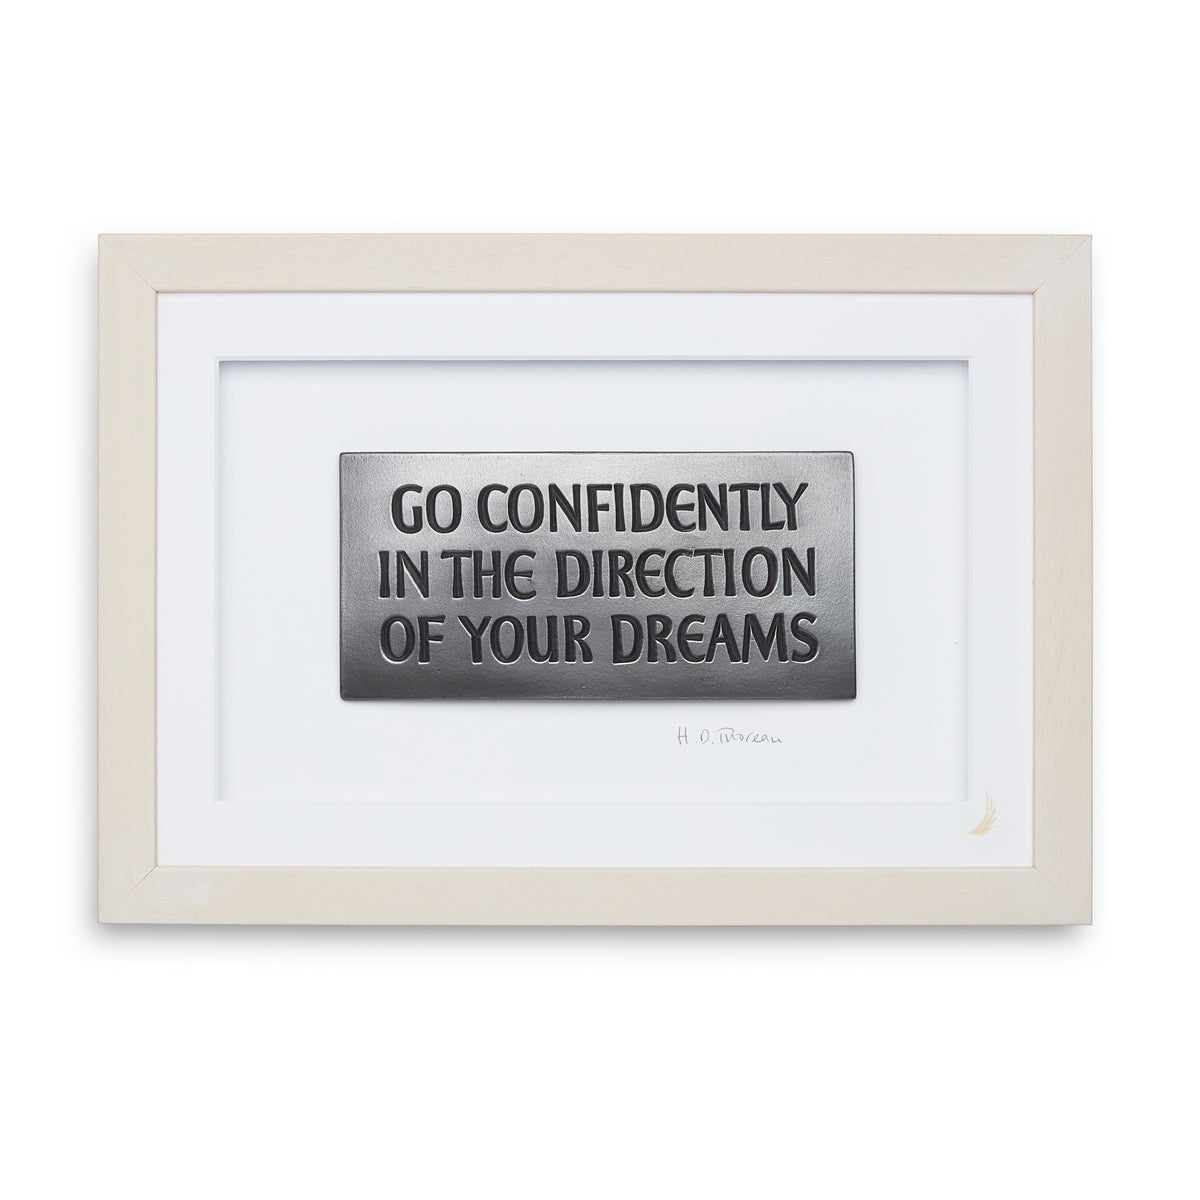 Go Confidently in the Direction of your Dreams